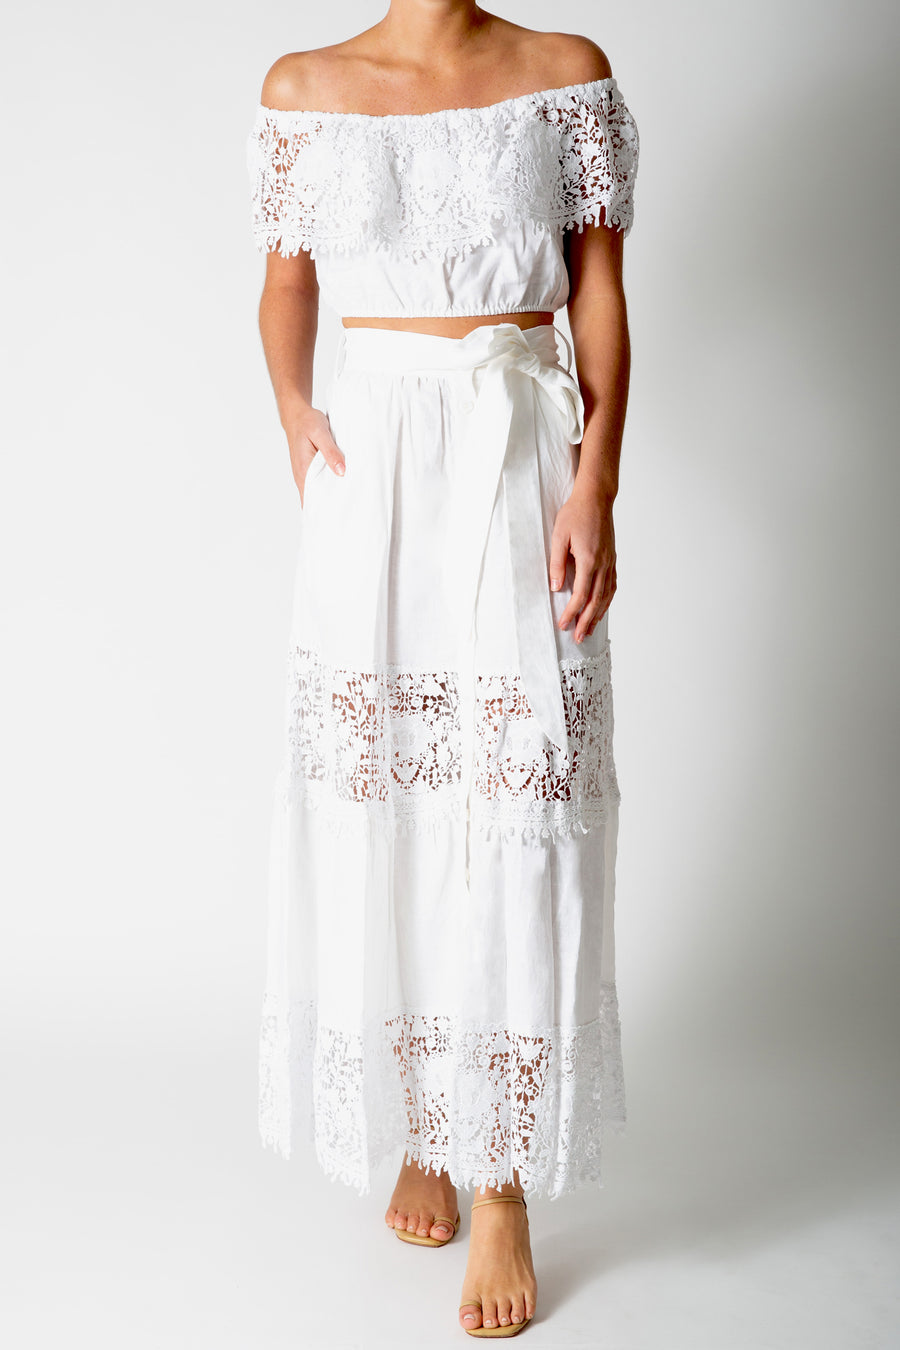 This is a photo of a woman wearing a white lace crop top with a matching white maxi skirt. She stands with her right hand in the skirt pocket.